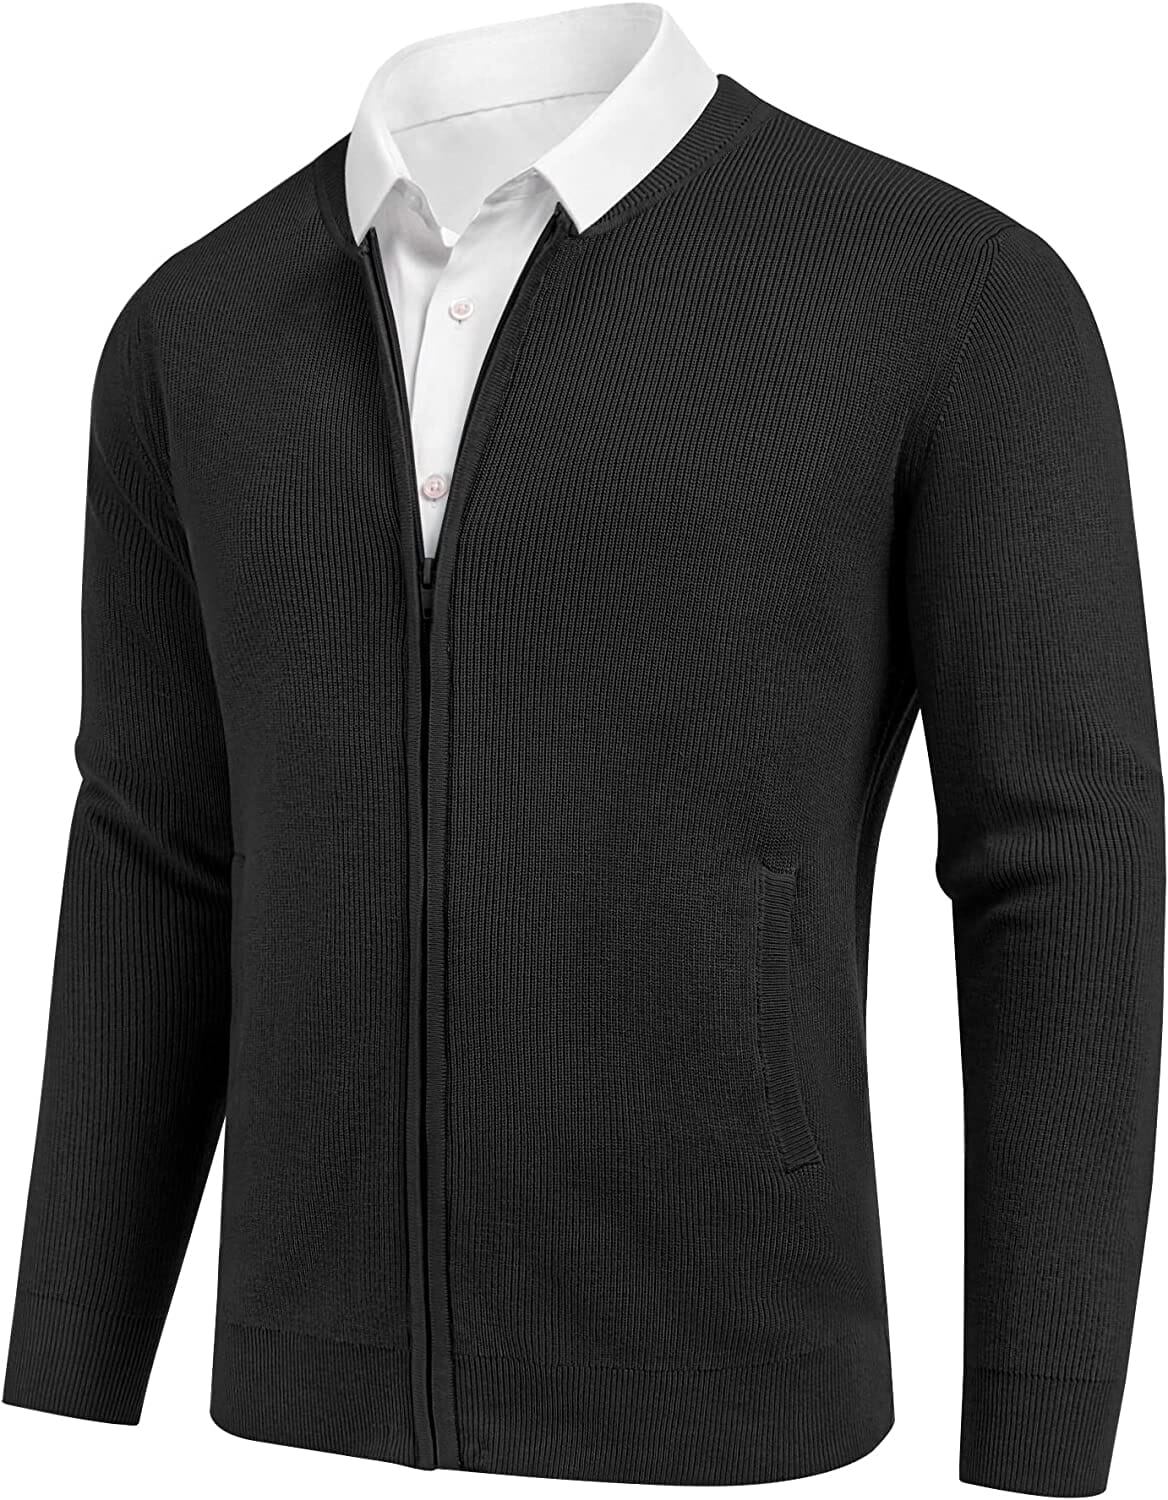 Full Zip Slim Fit Stylish Knitted Cardigan Sweater with Pockets (US Only) Sweaters COOFANDY Store Solid Black S 